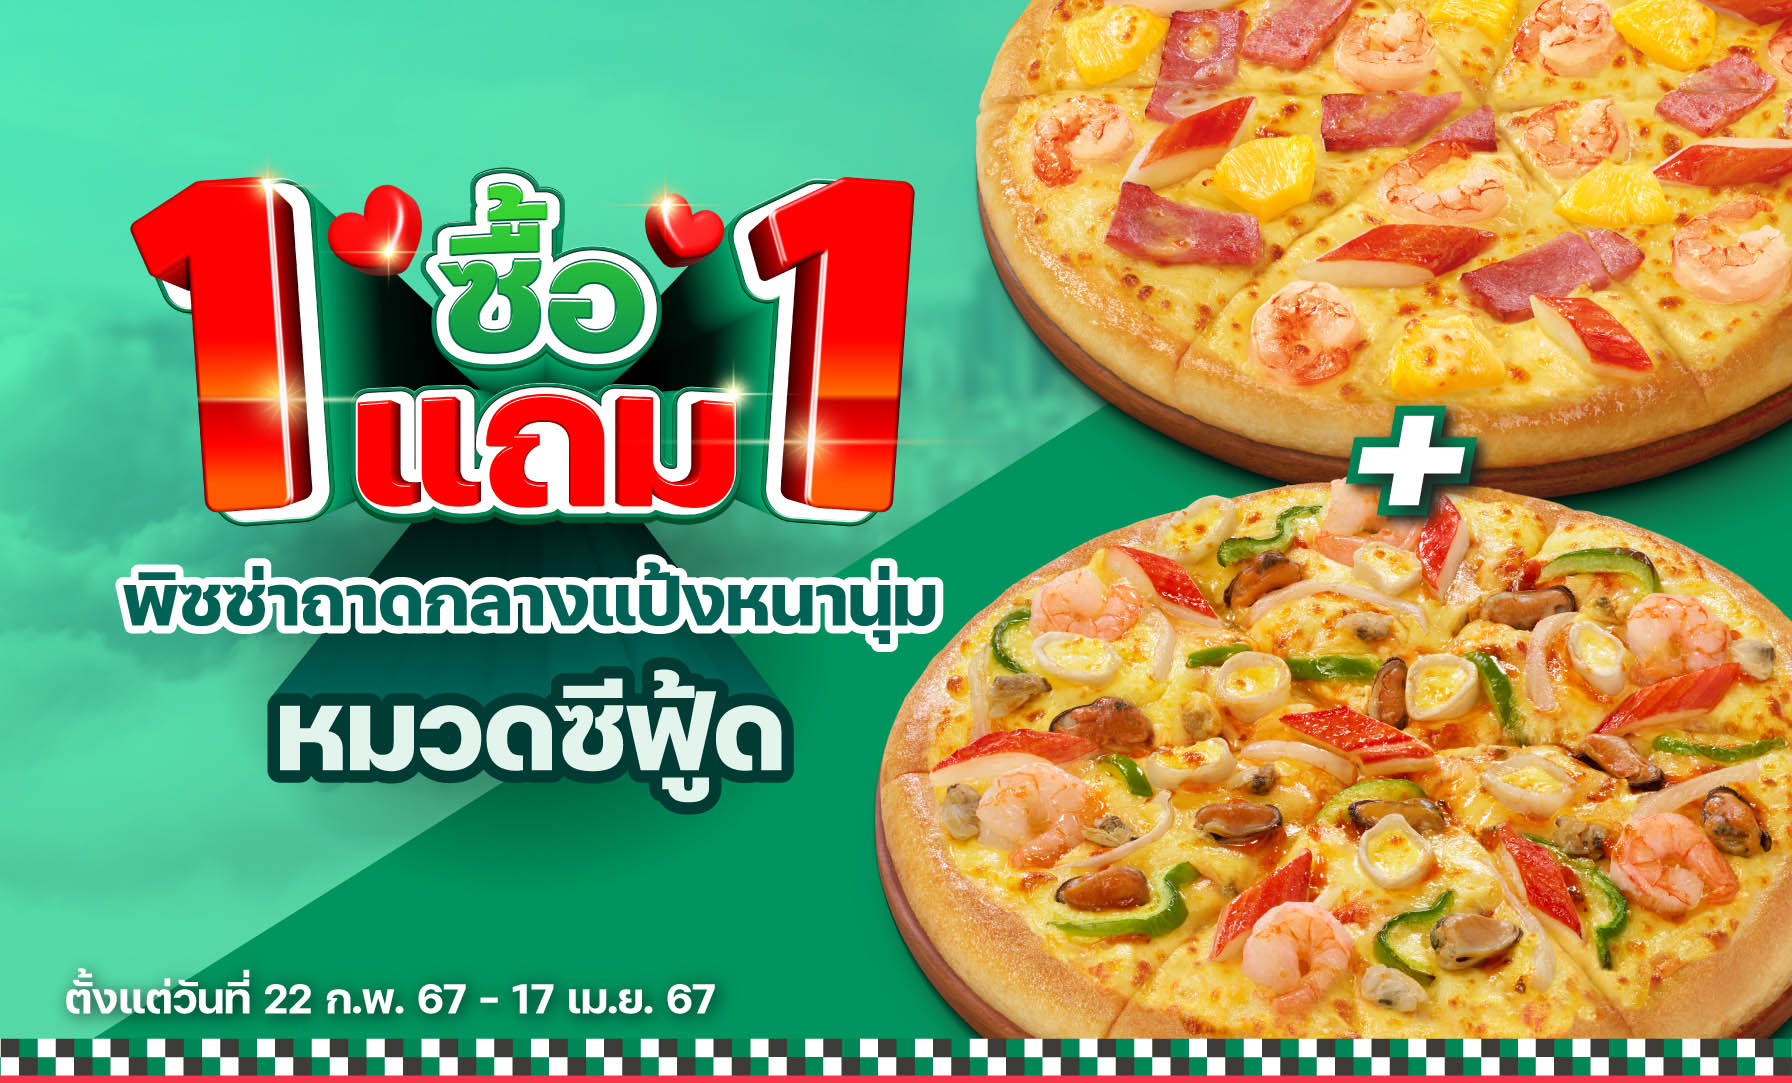 Buy 1 Get 1 Free Pan Pizza with Seafood Topping